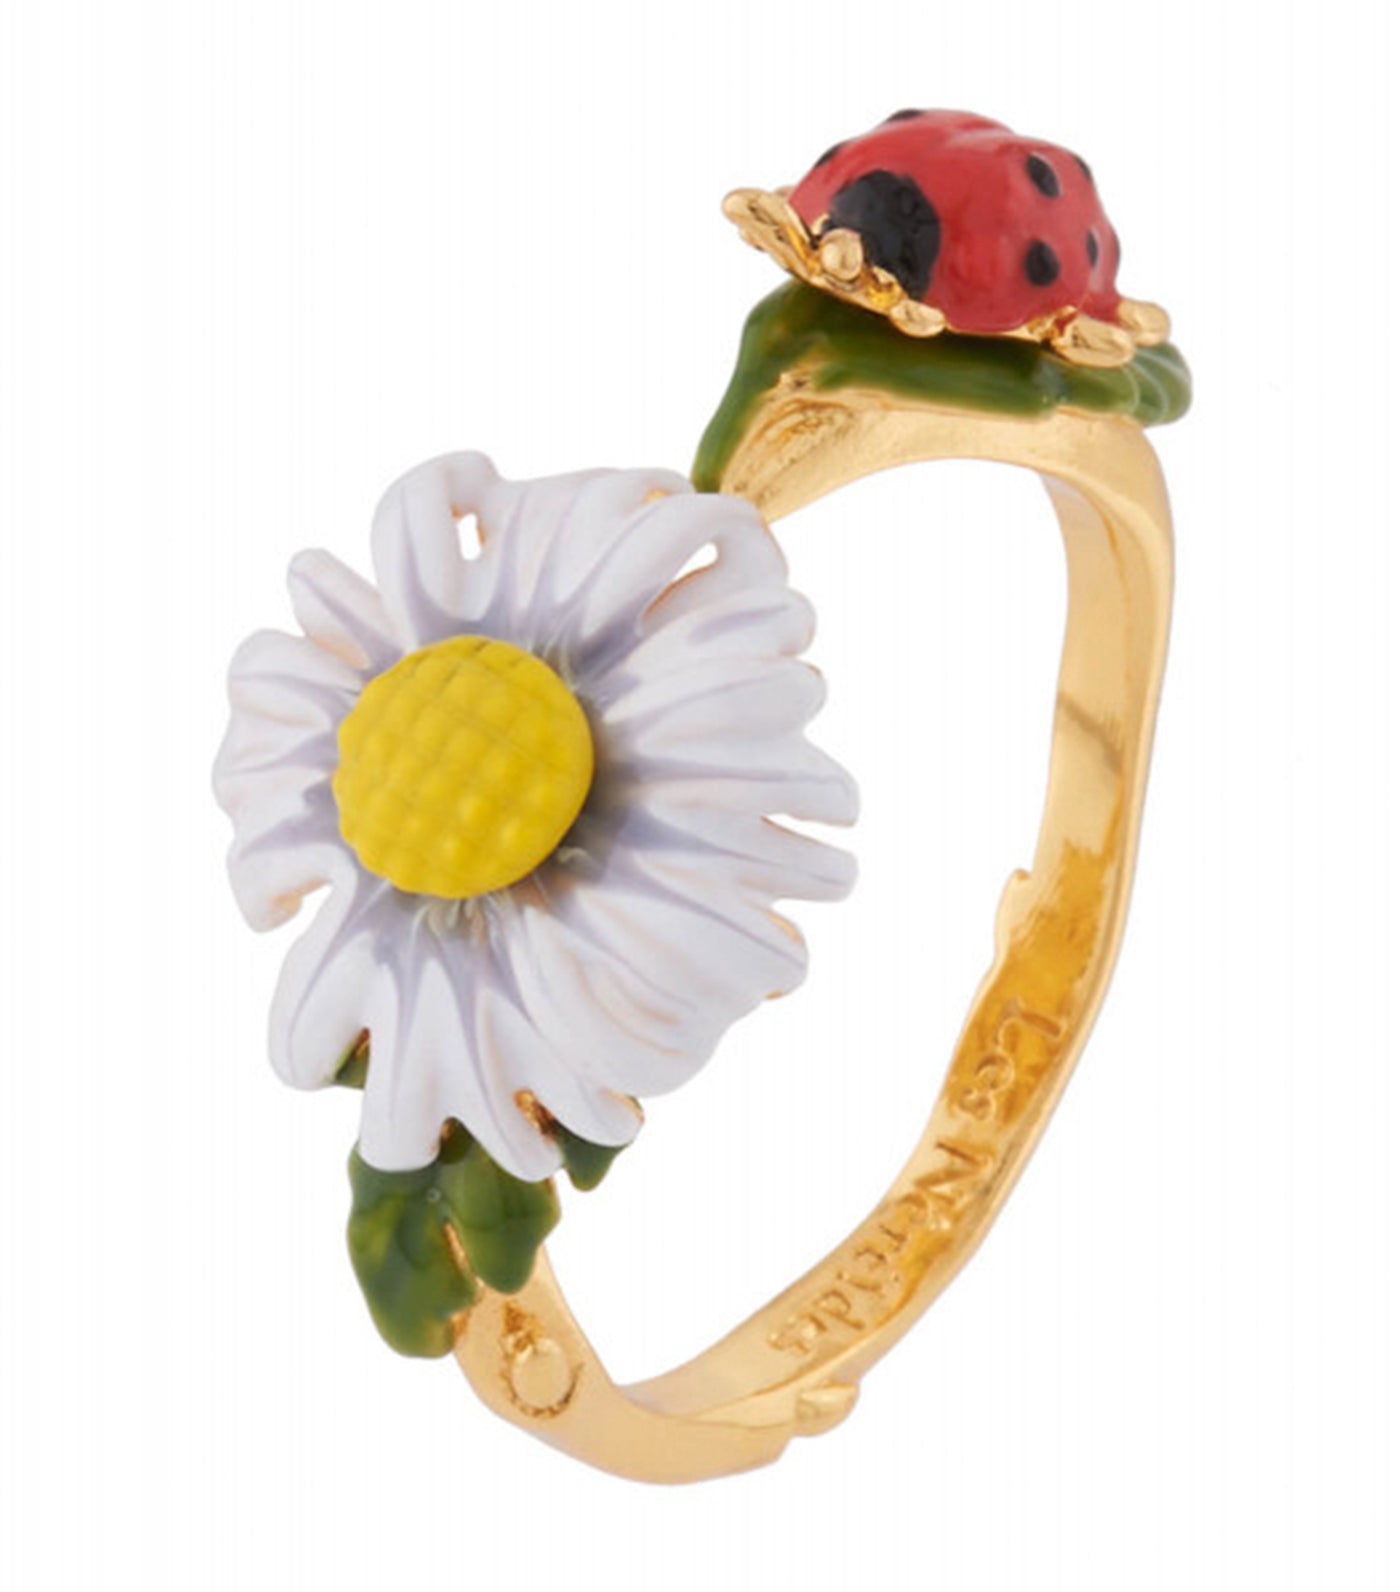 les néréides country daisy and ladybug ring